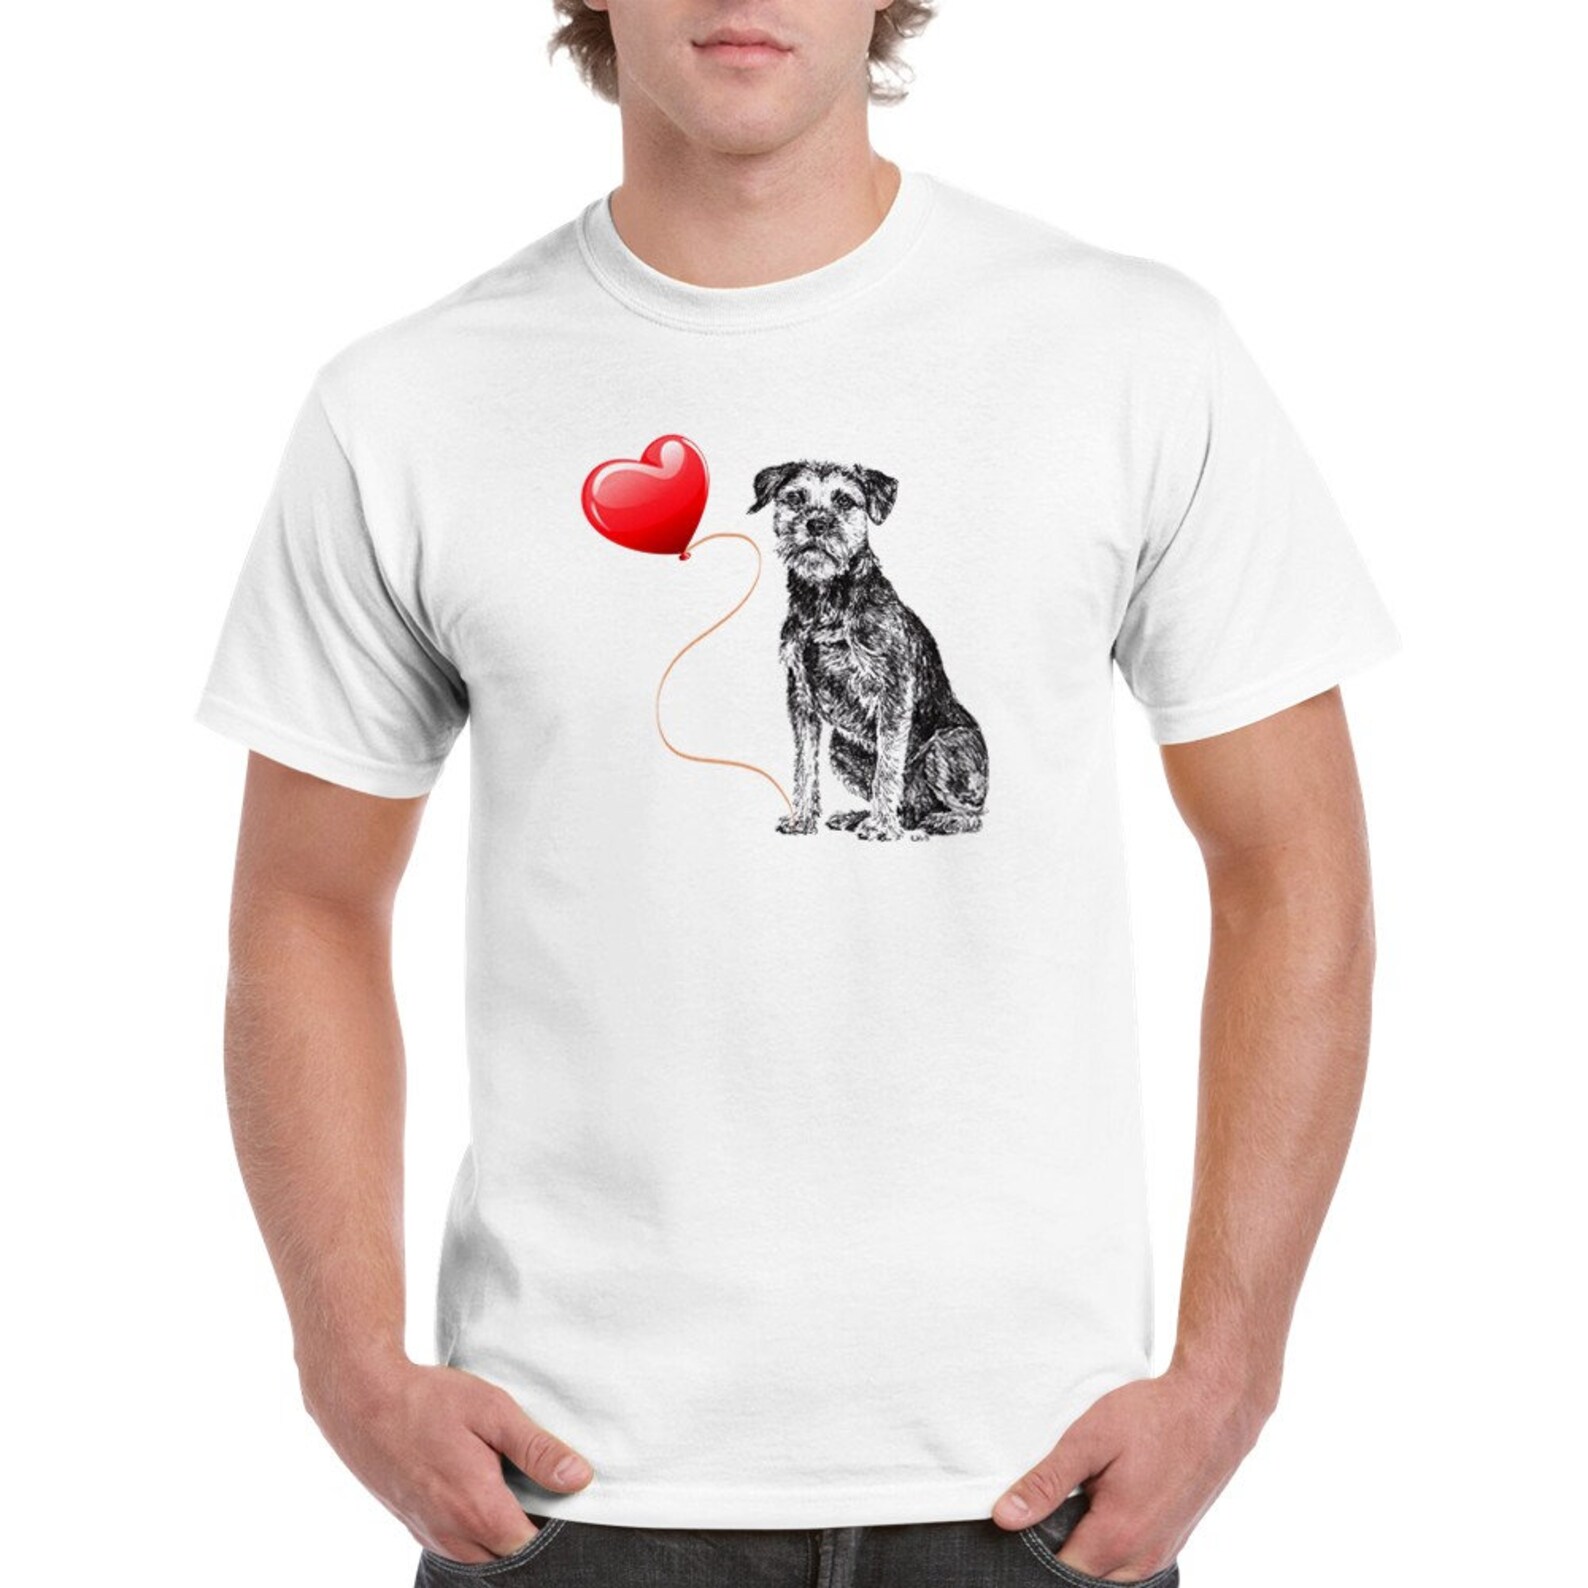 Border Terrier with heart t-shirt by Louisa Hill